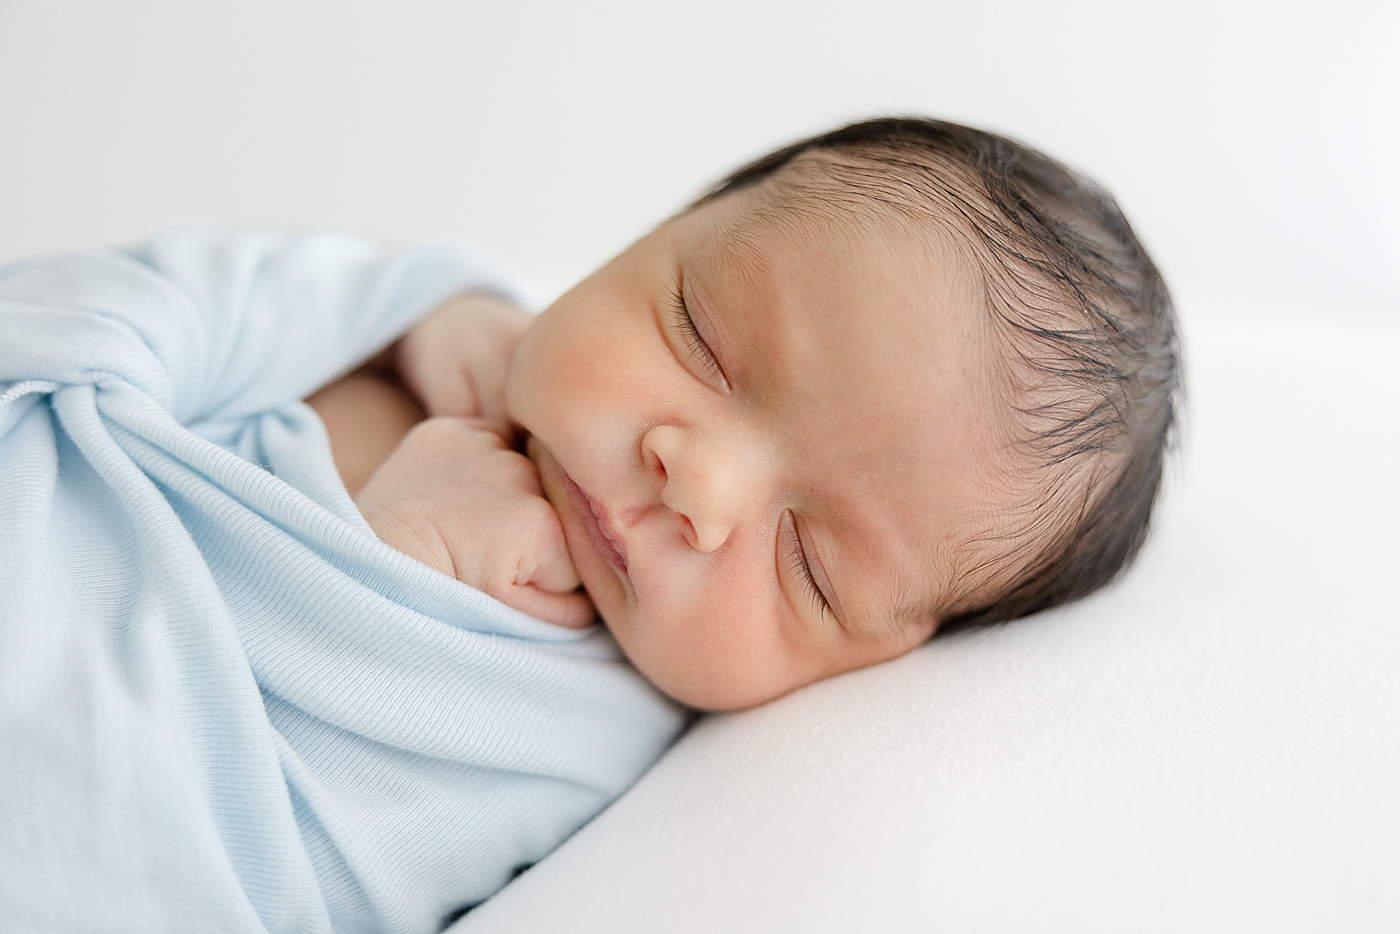 Newborn sleeping while wrapped in a light blue swaddle | Image by Sana Ahmed Photography 